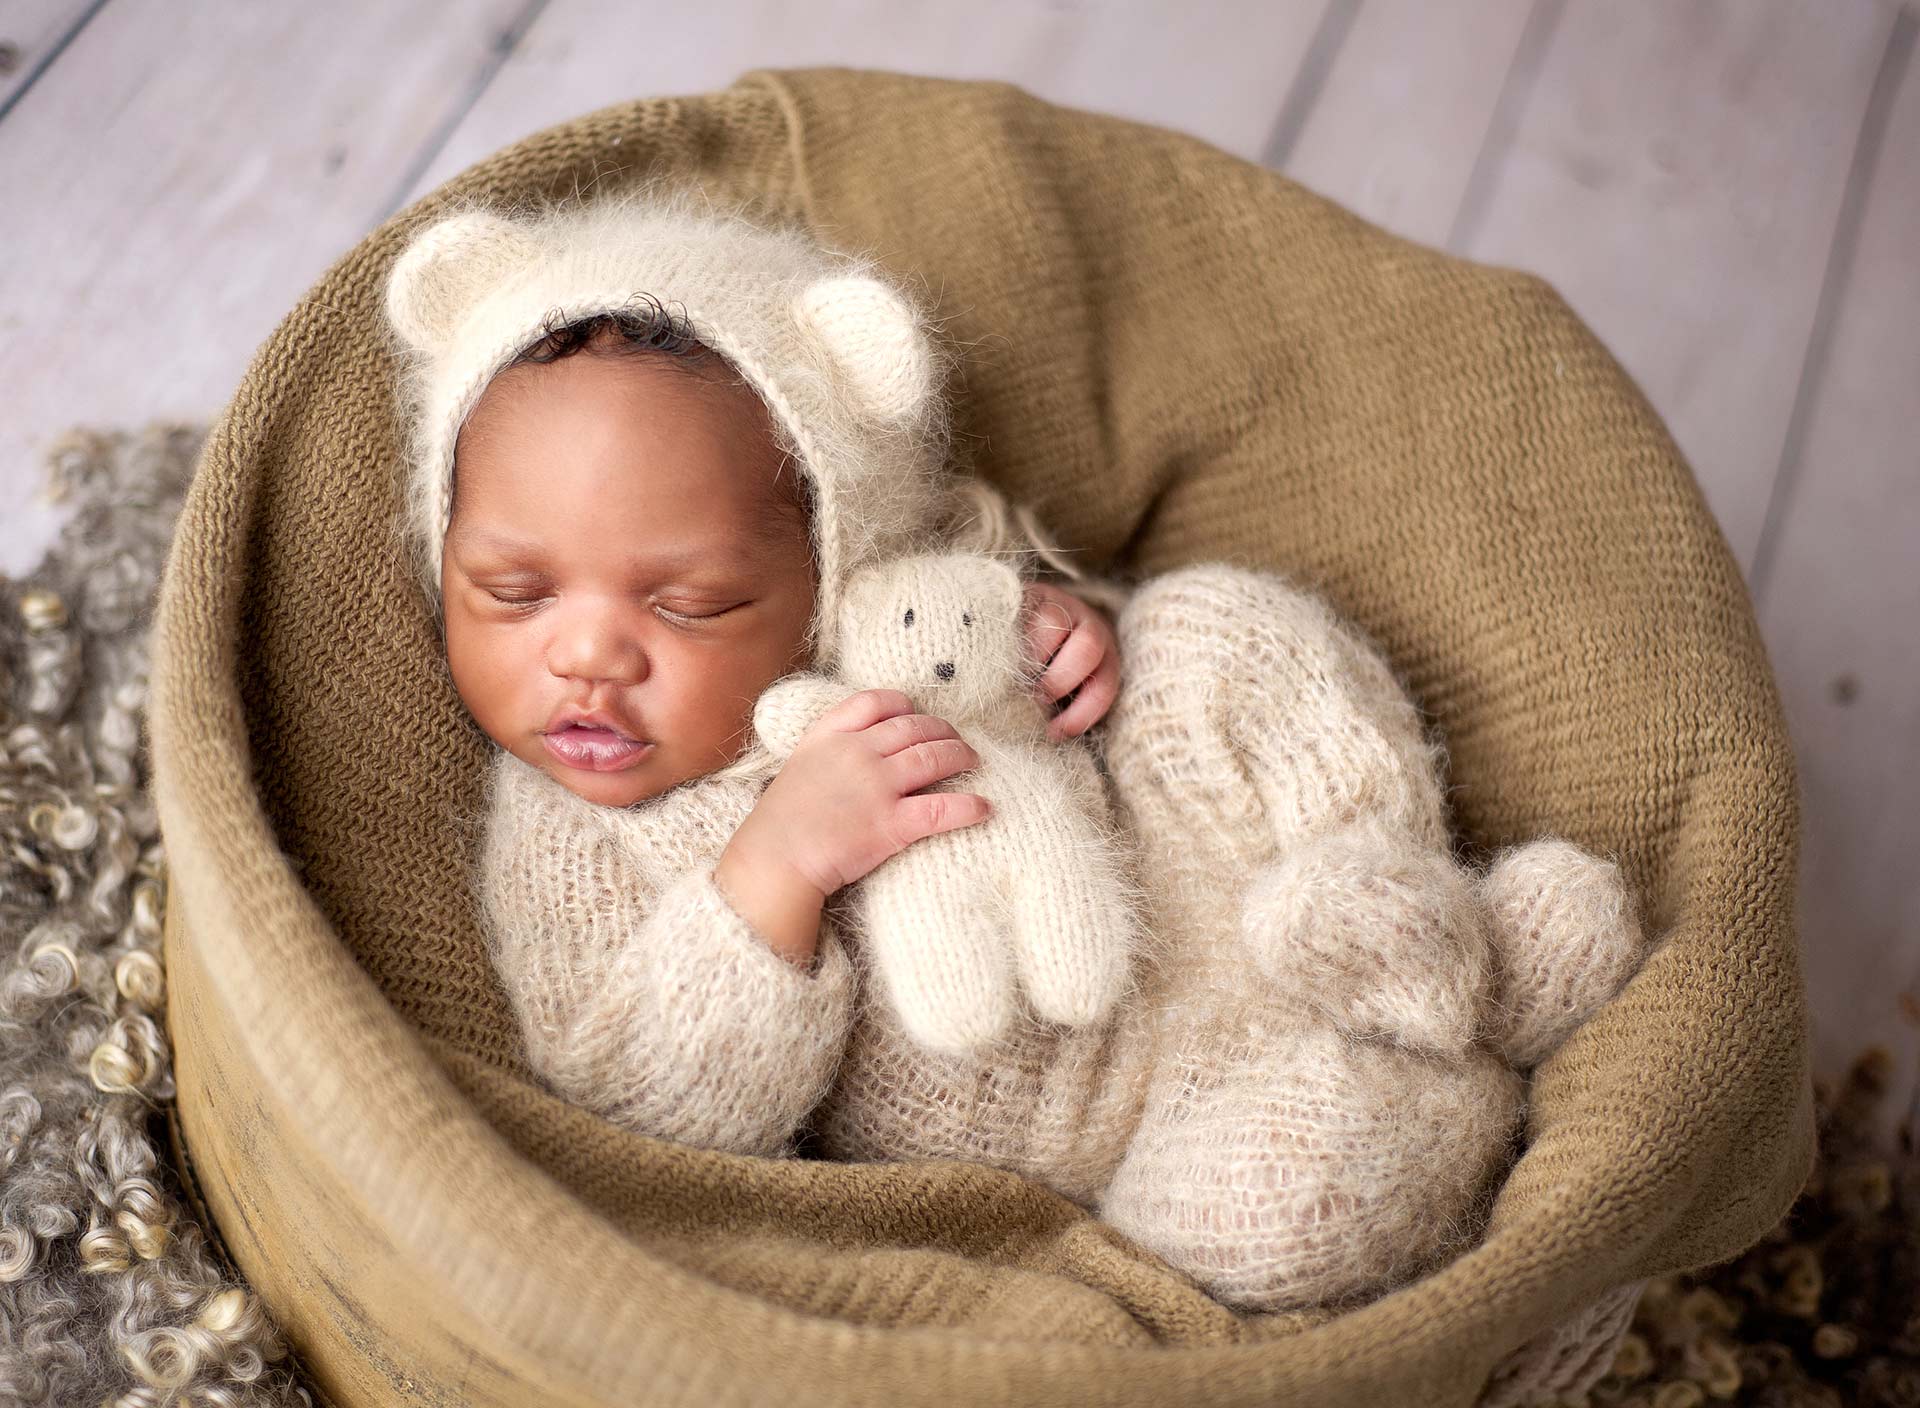 images of a newborn wrapped in a basket holding a teddy bear